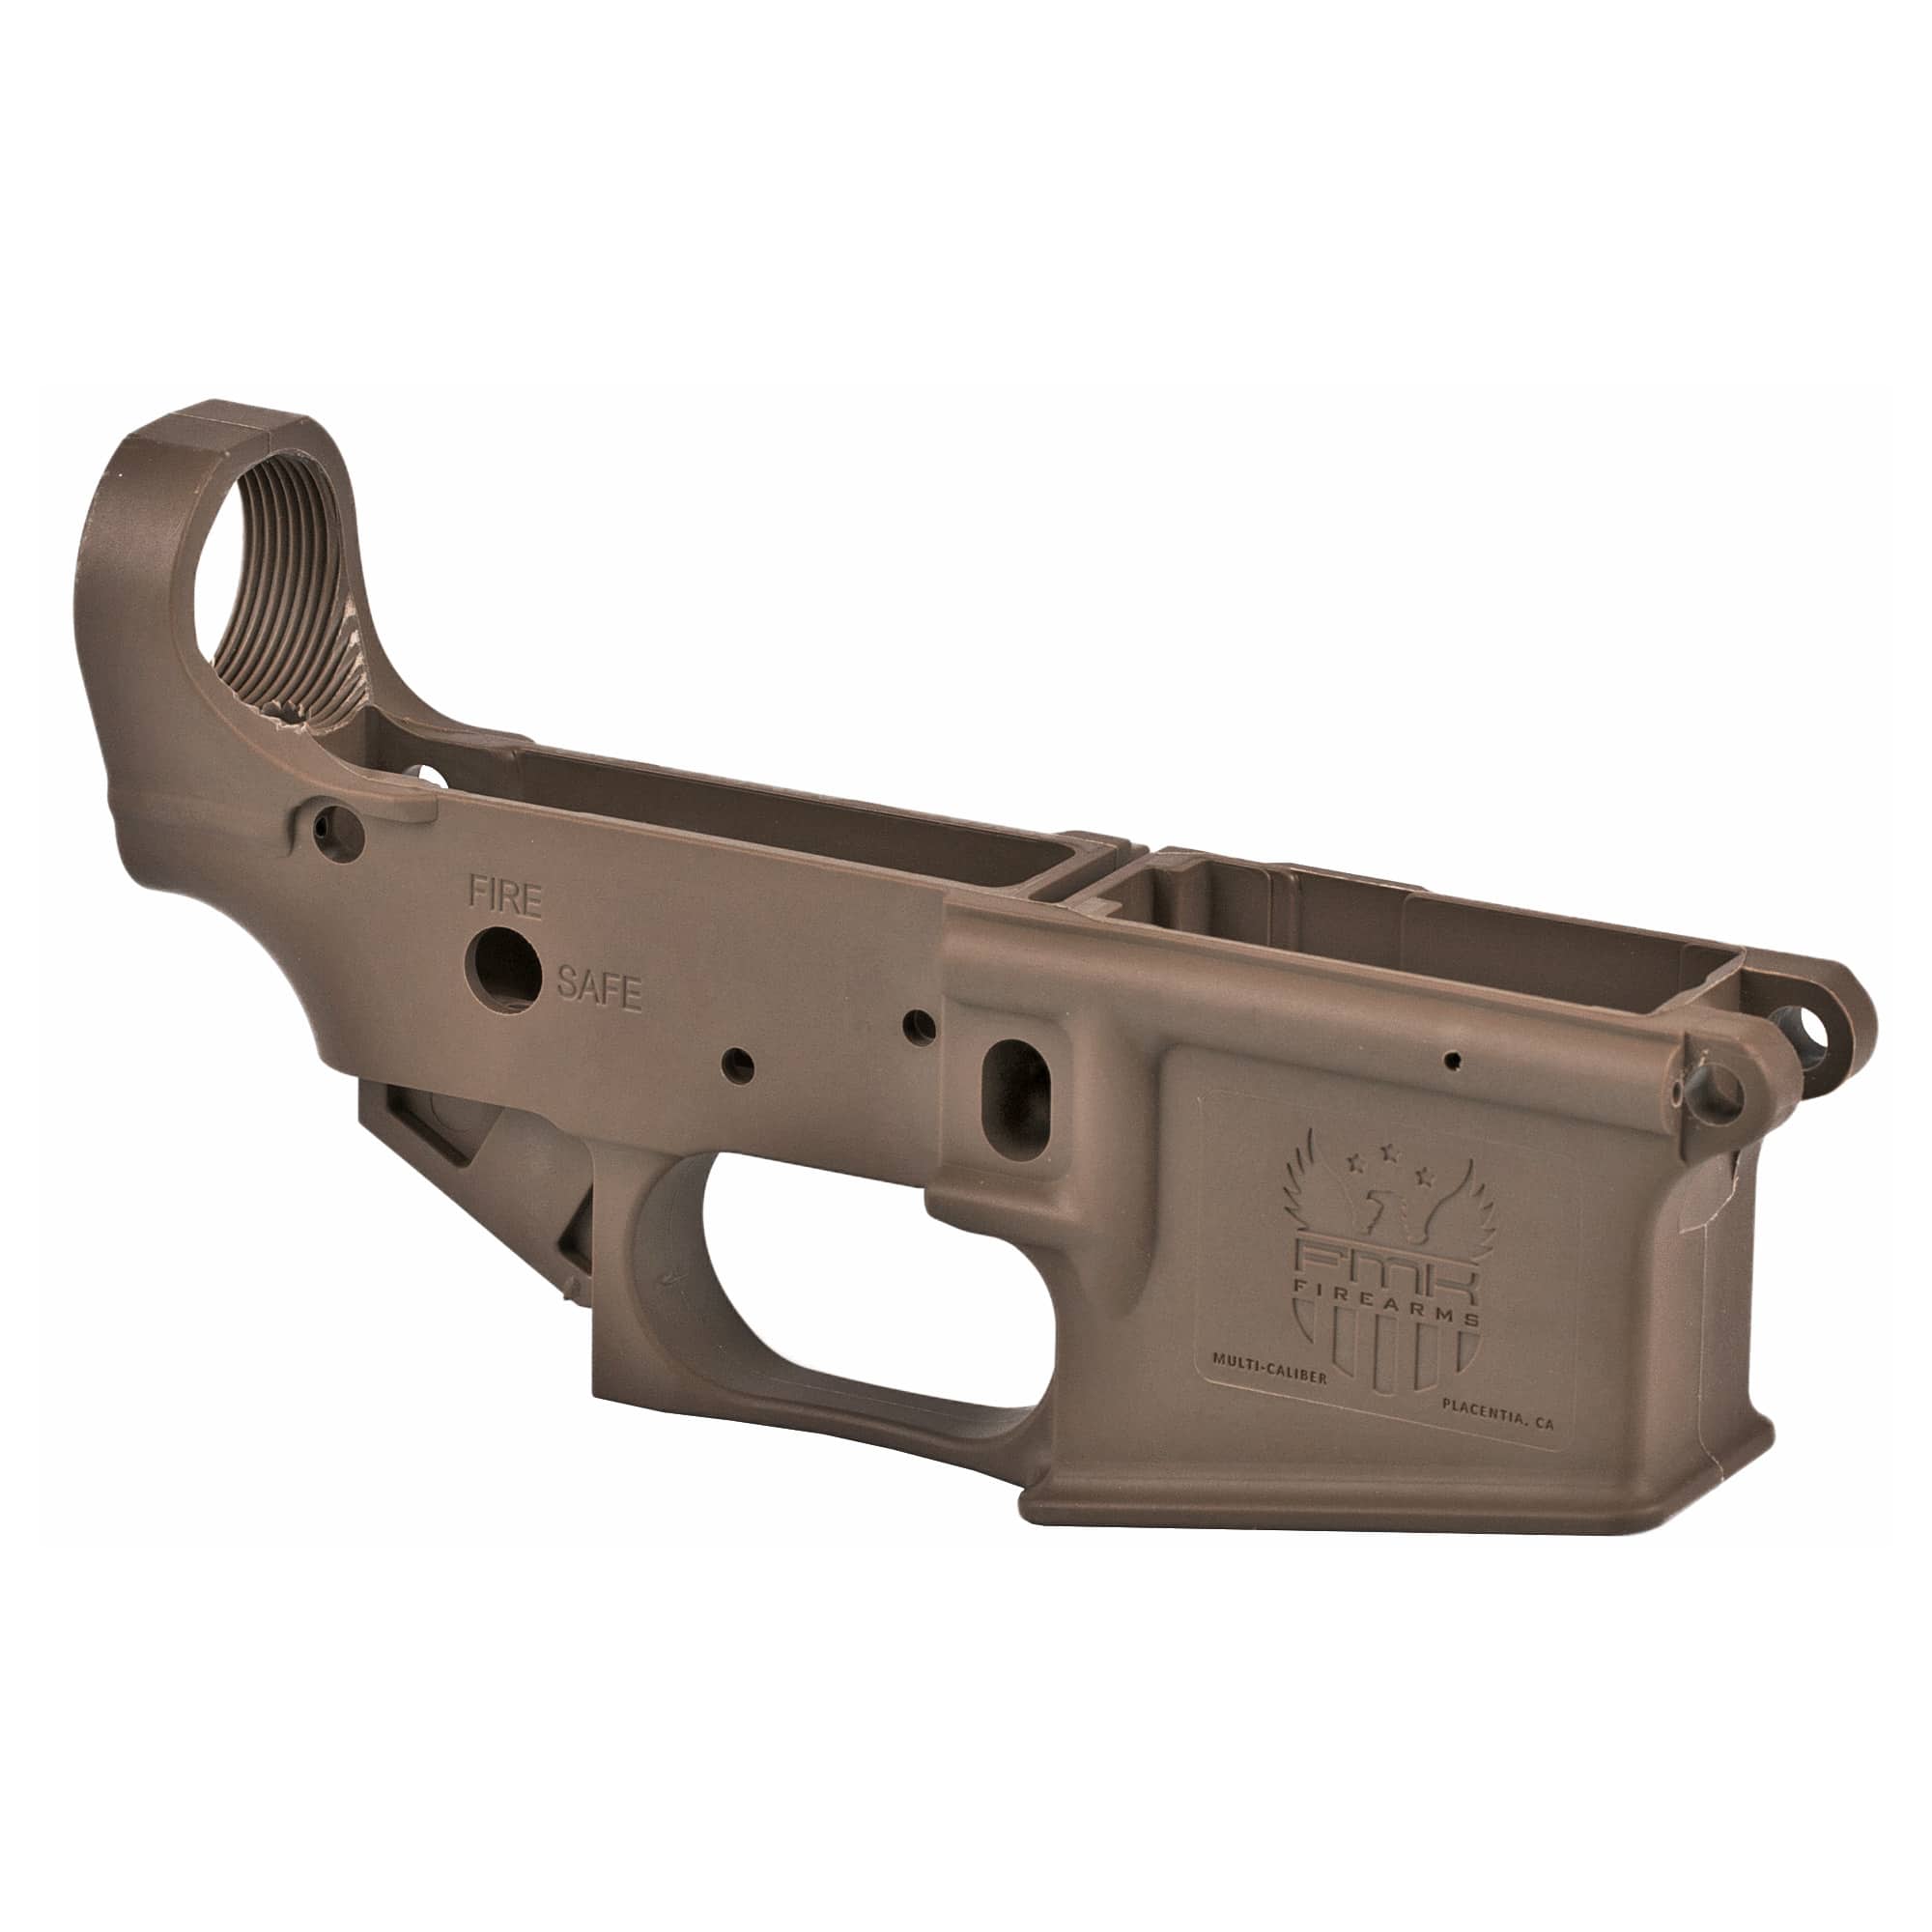 FMK AR-1 EXTREME POLYMER STRIPPED LOWER BURNT BRONZE – Tactical World